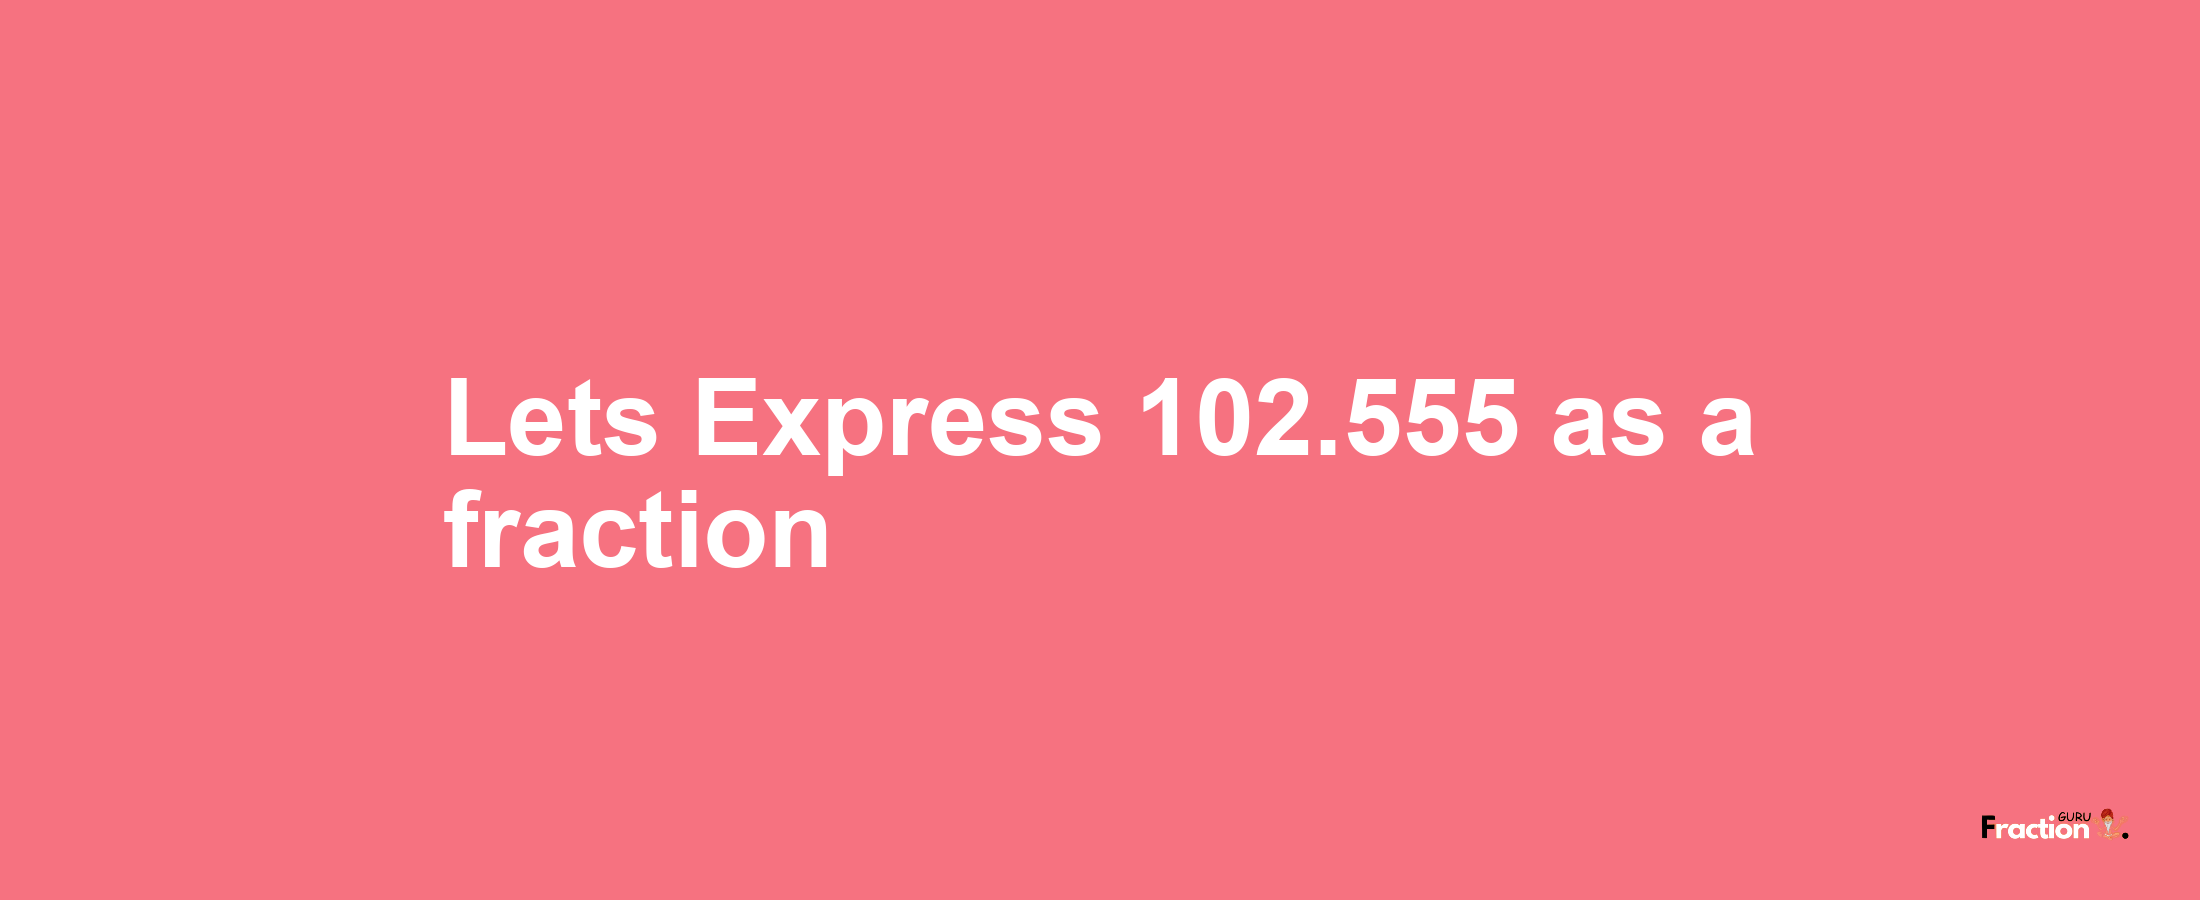 Lets Express 102.555 as afraction